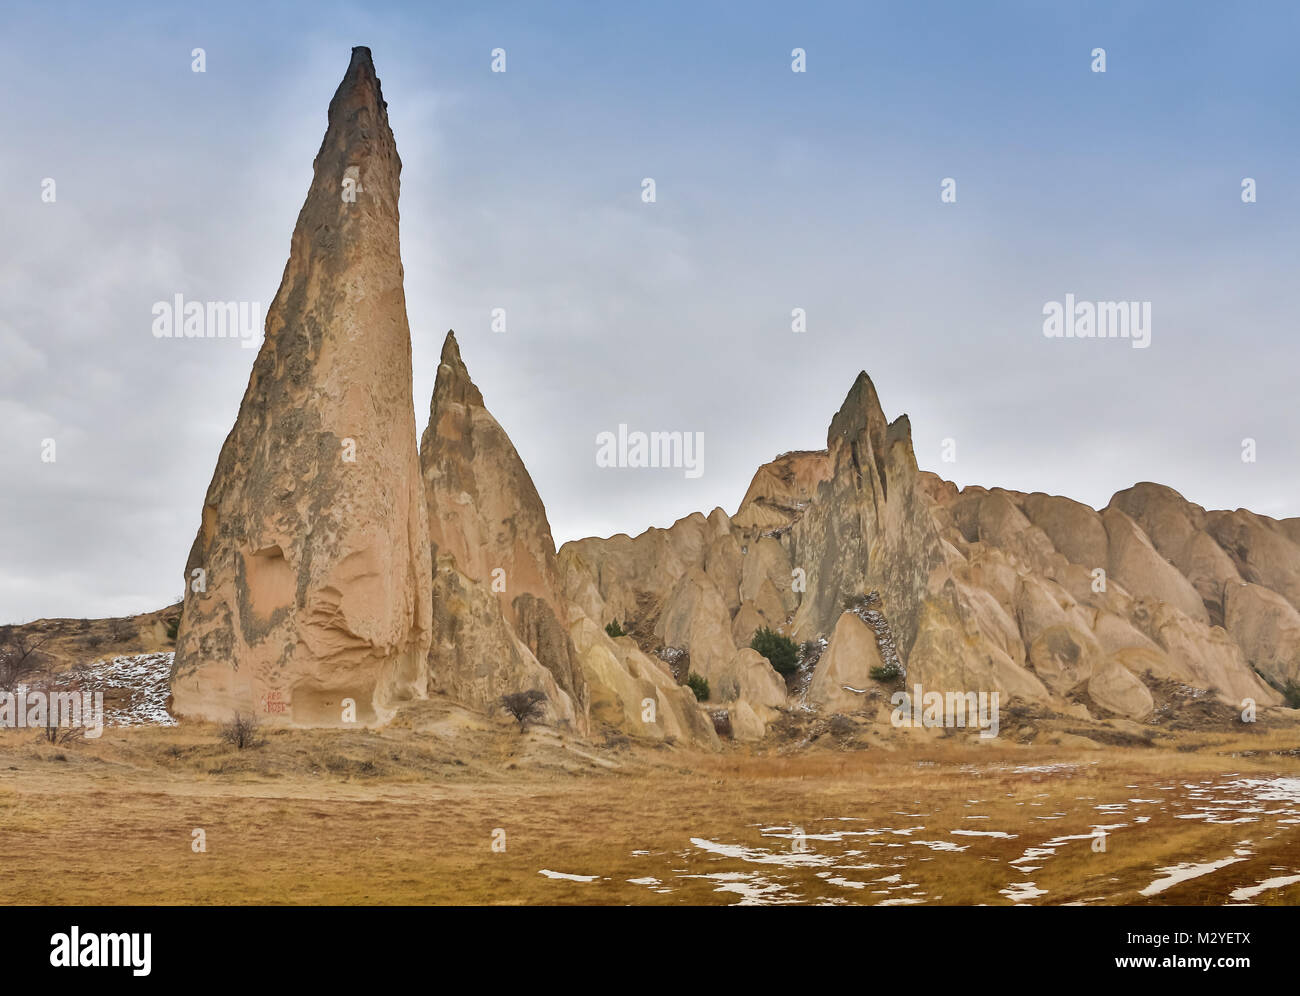 The sharp cones of rock formations boasts unique colors and shapes, Cappadocia, Turkey. Stock Photo